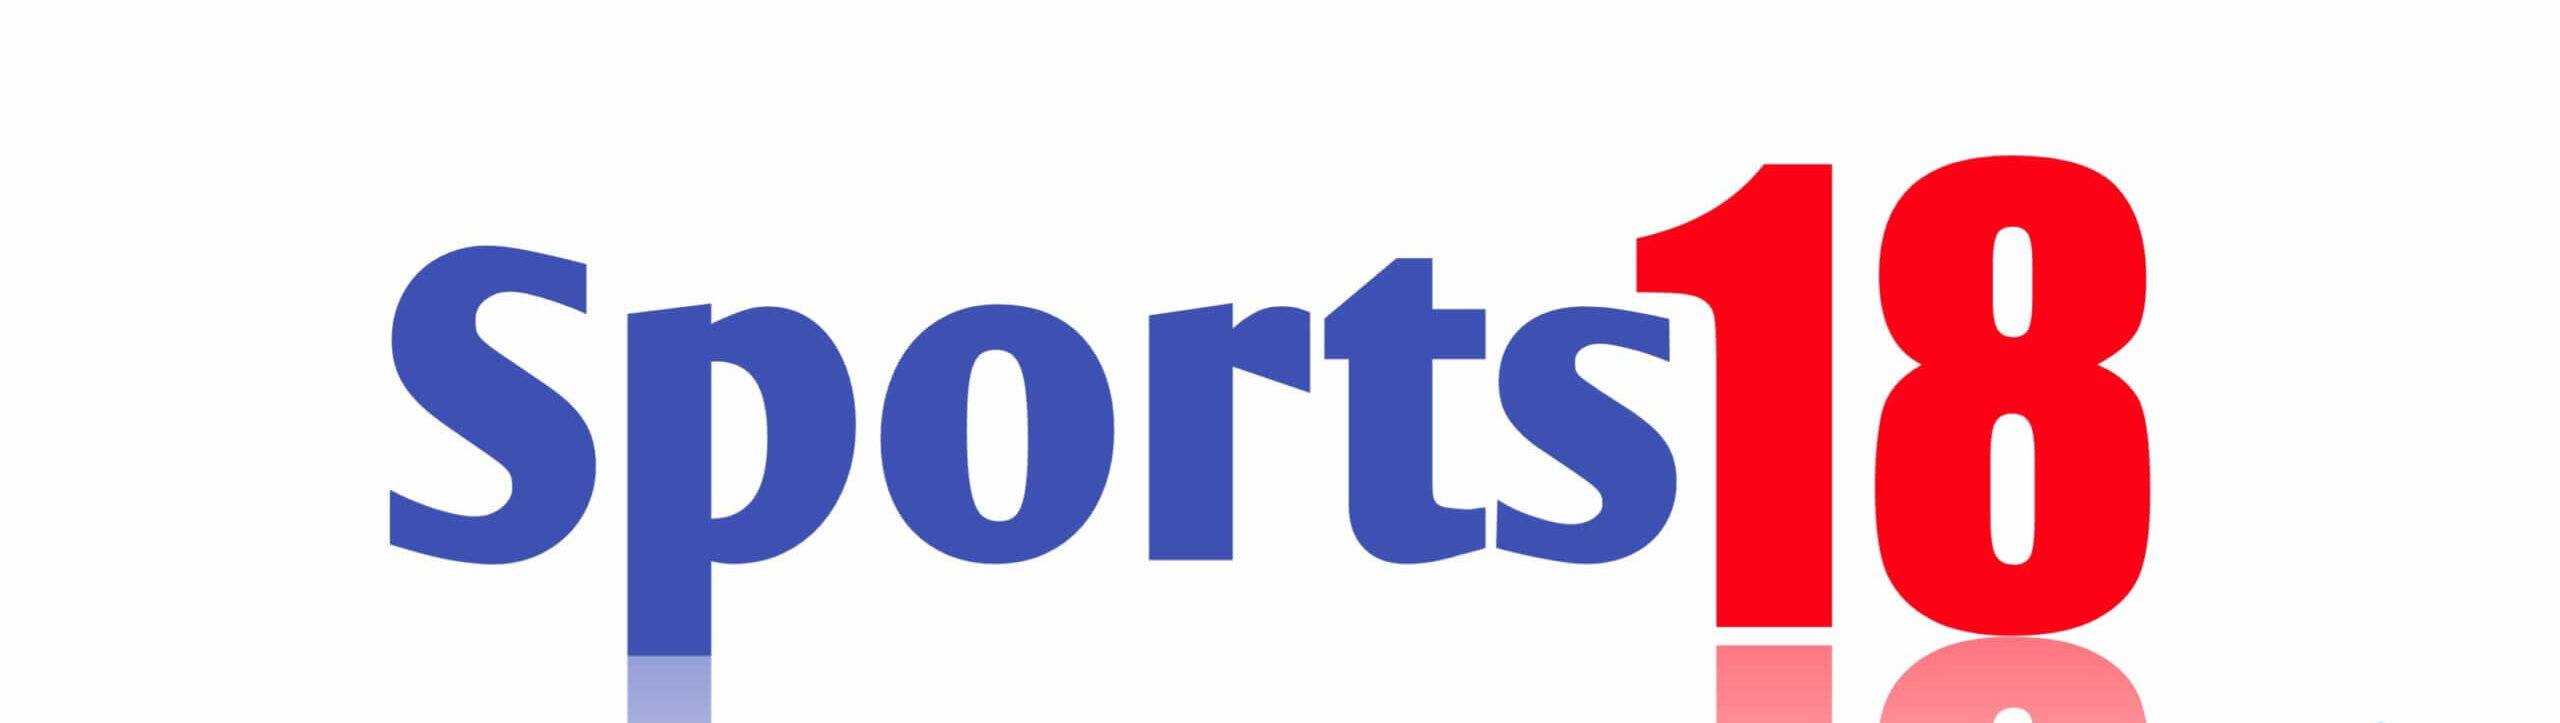 Viacom18 launches a new sports channel Sports18